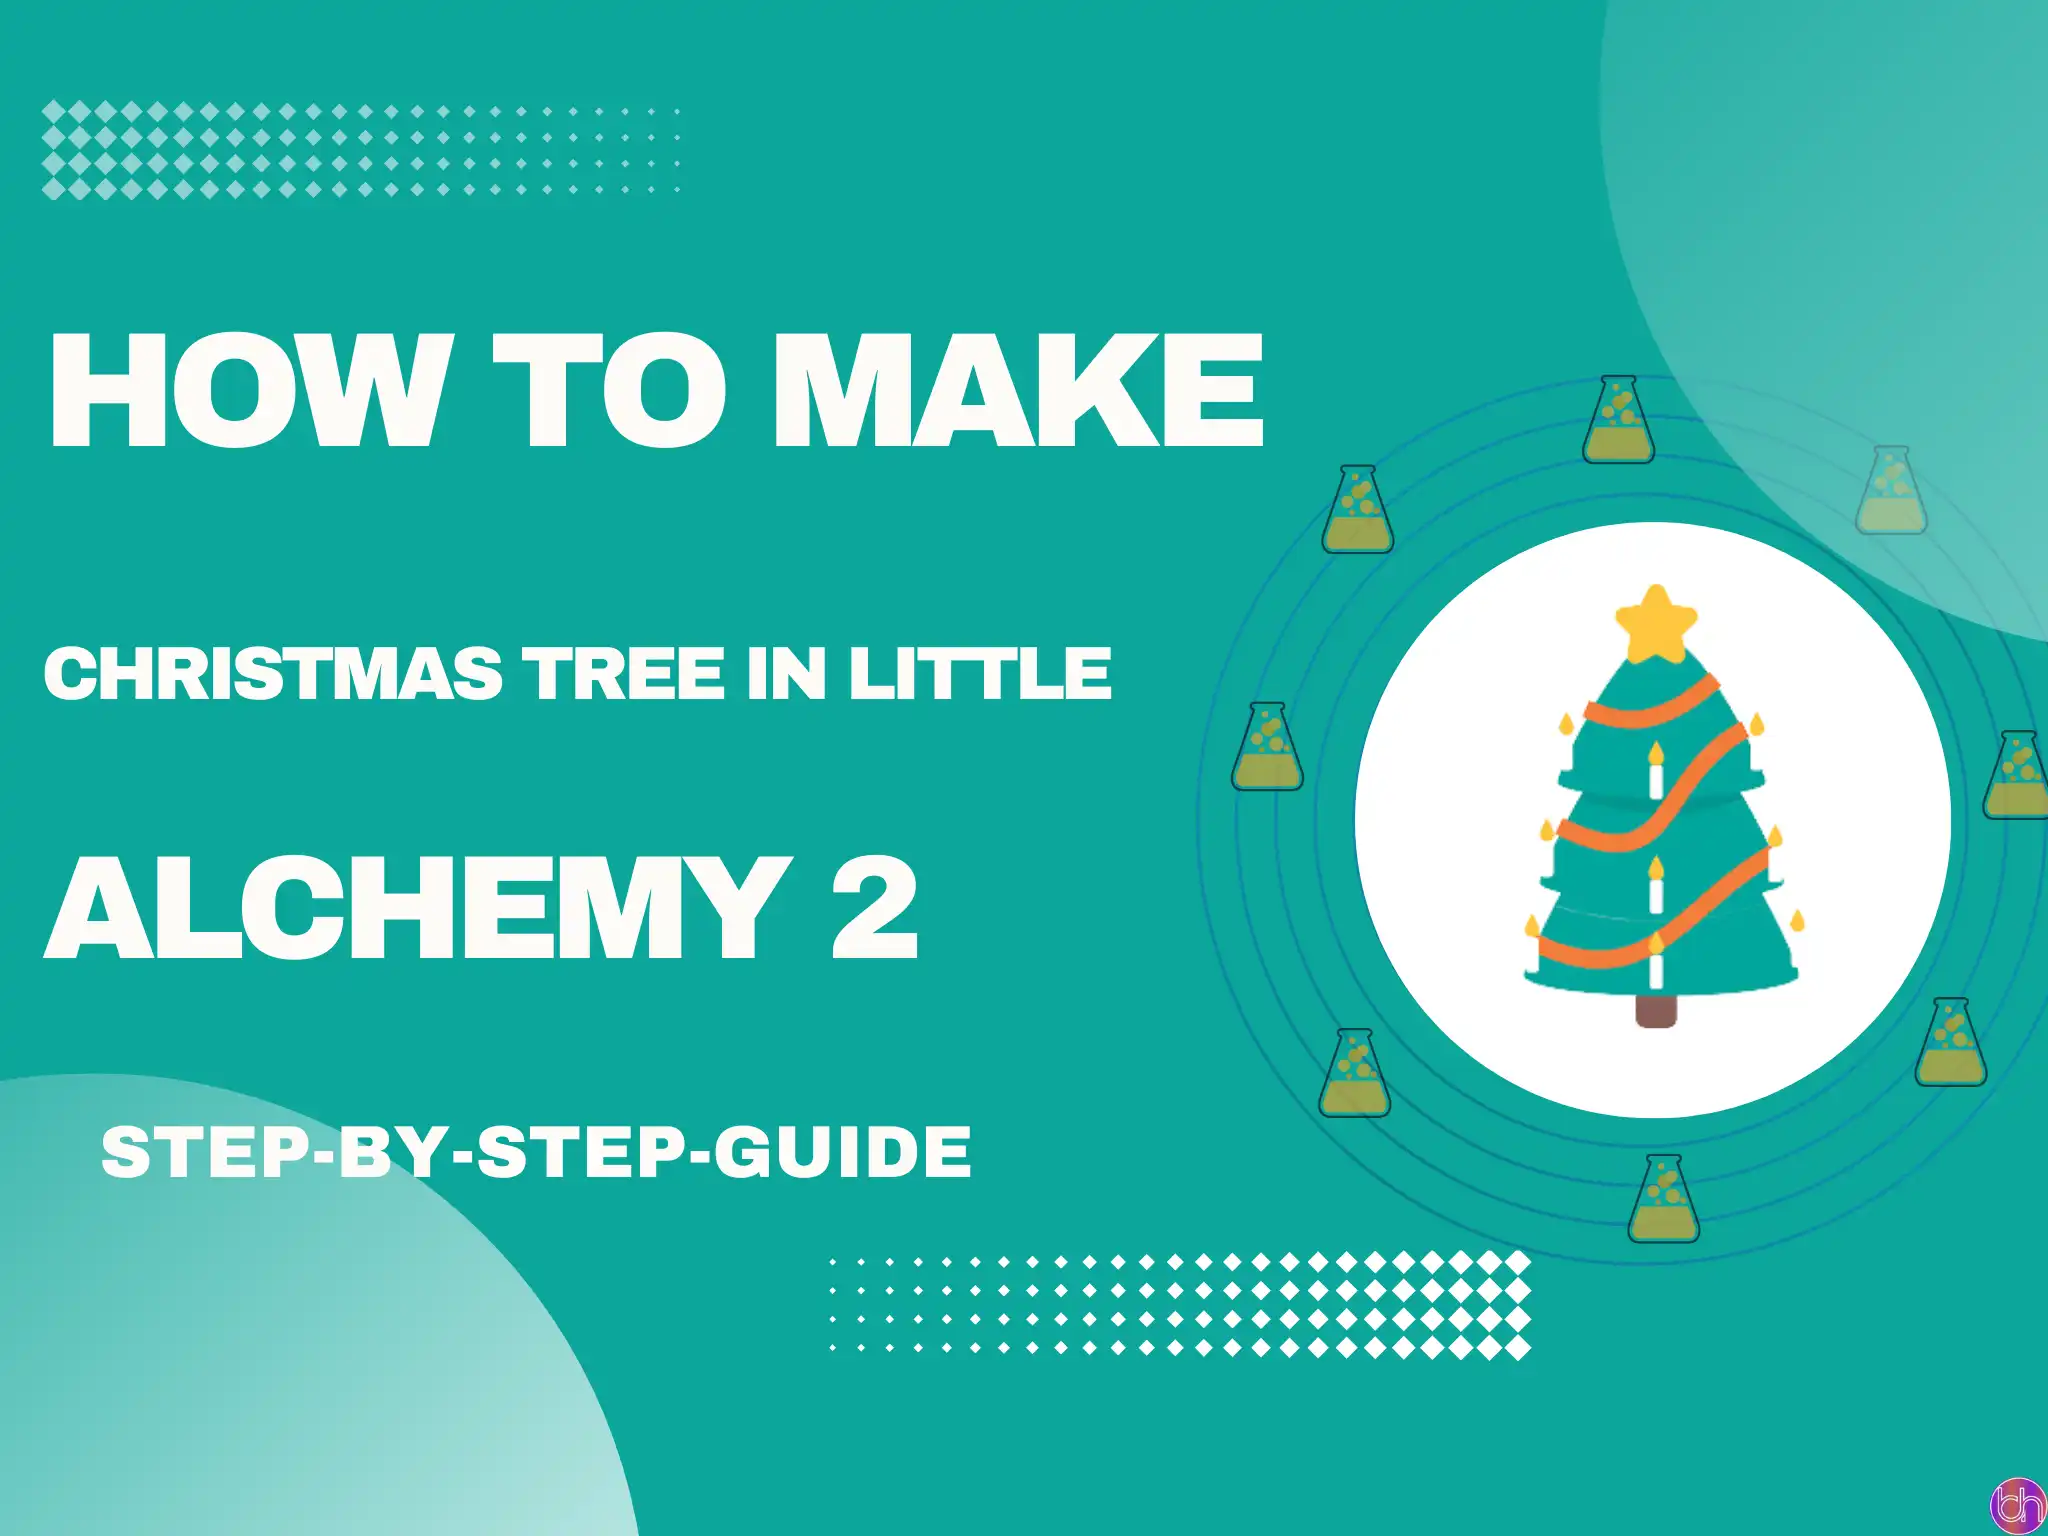 How to make Christmas in Little Alchemy 2